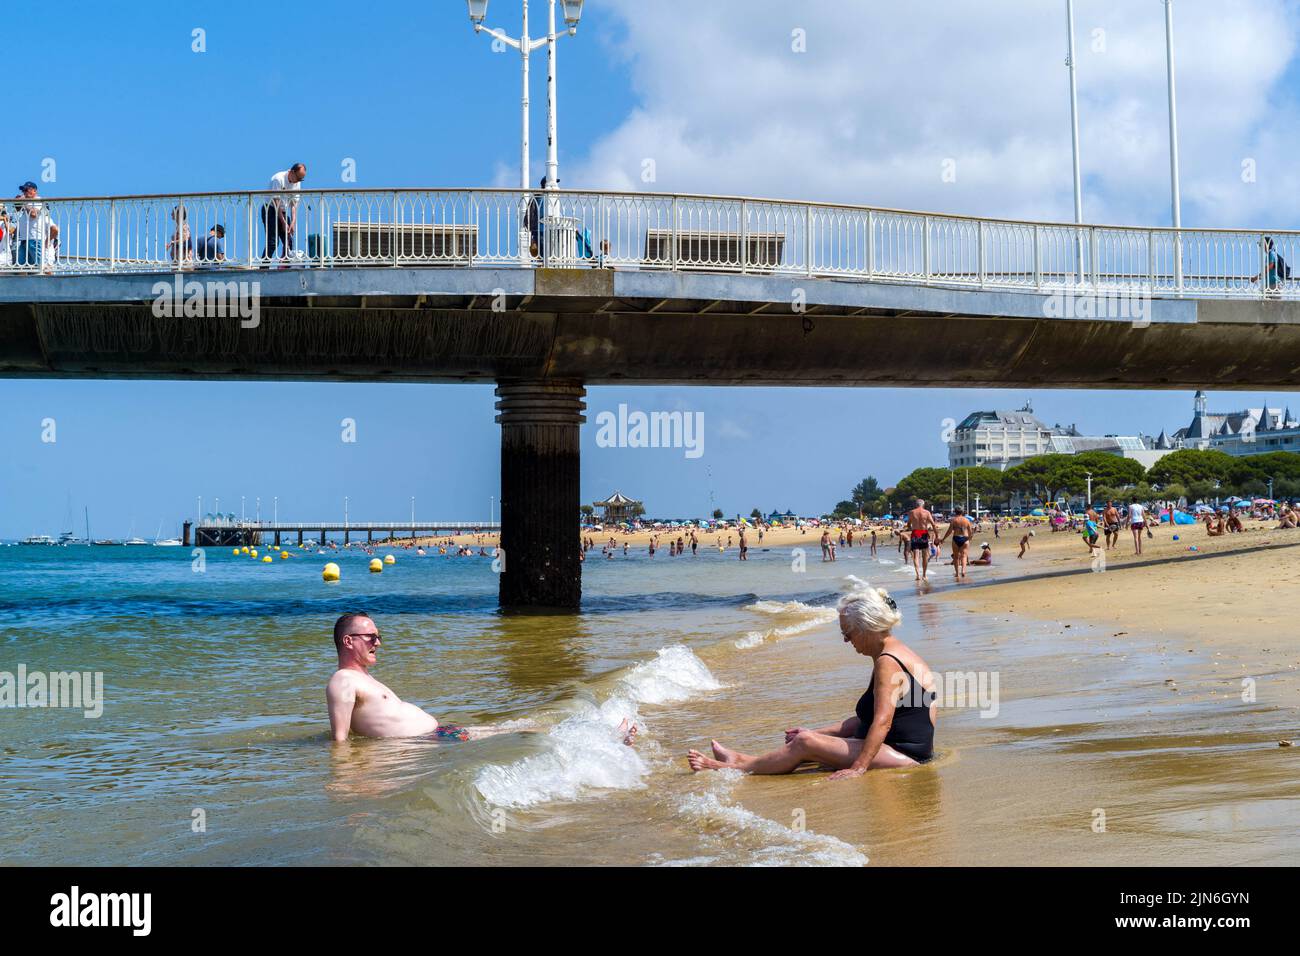 Two people, a man and a woman sitting in the water on the beach of Arcachon. Arcachon beach, the Belisaire pier, the embarkations, the lovers, the bathers, a day at the beach. August 04, 2022. Photo by Patricia Huchot-Boissier/ABACAPRESS.COM Stock Photo